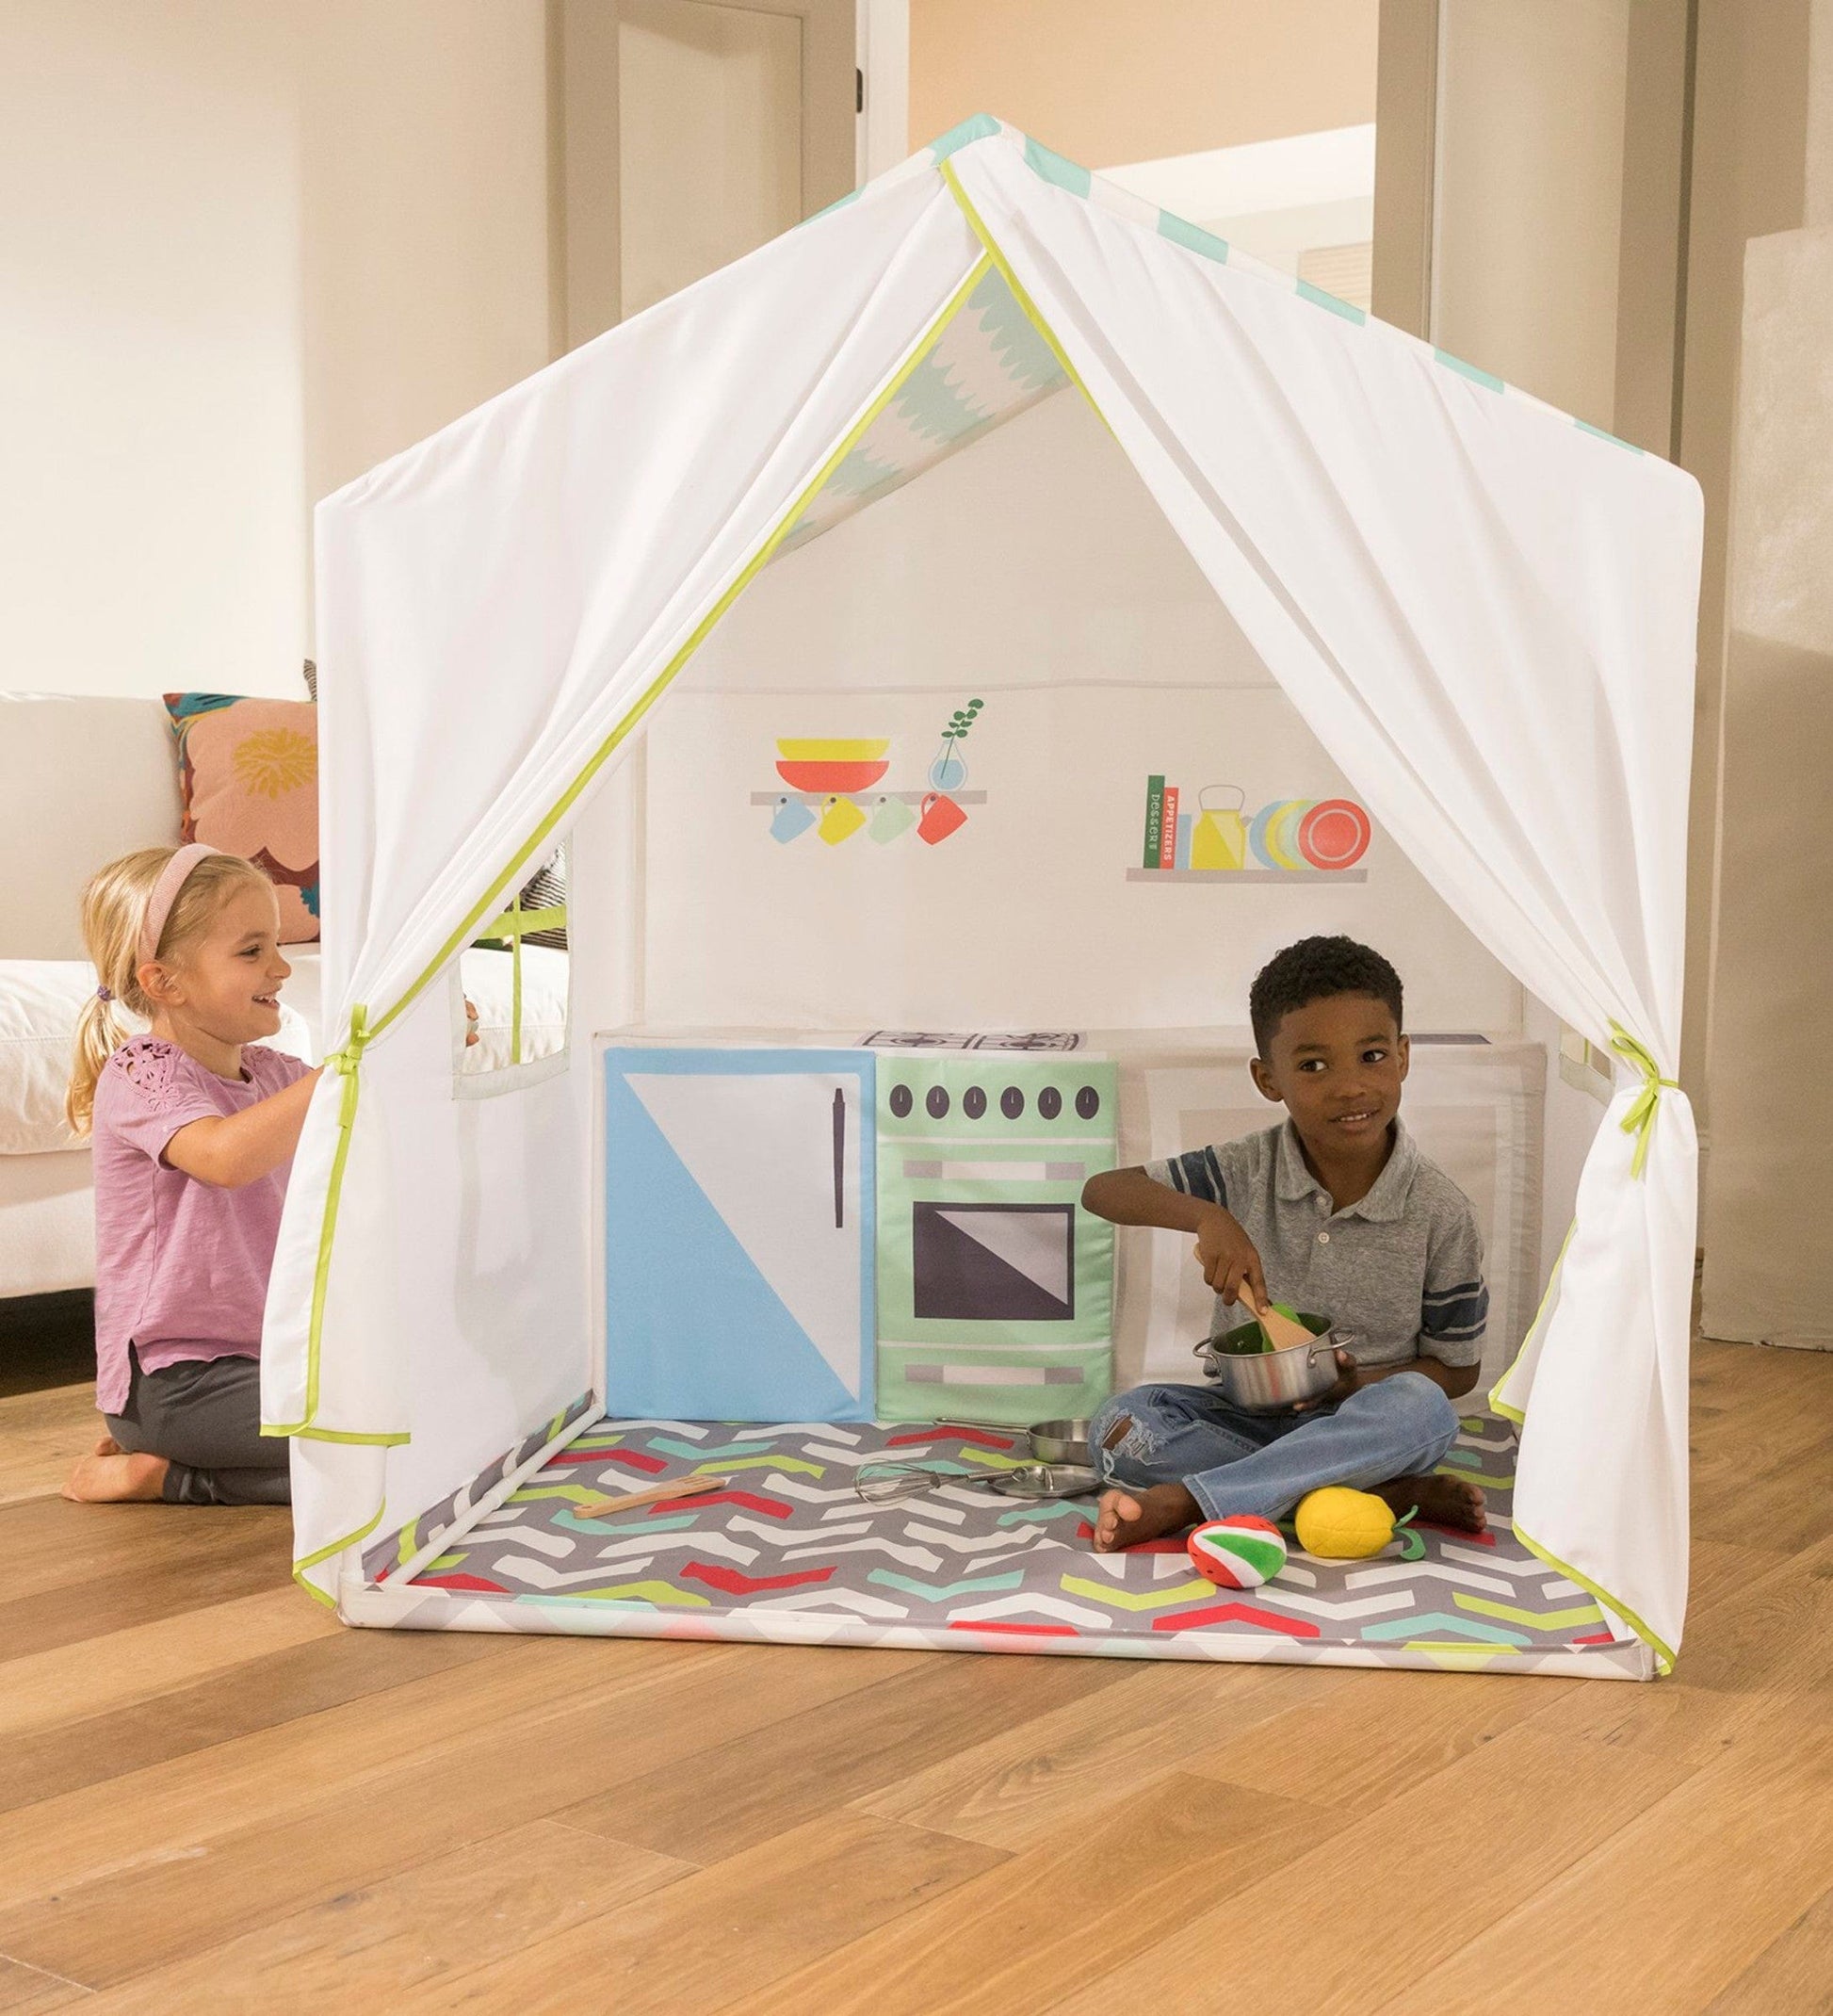 4-Foot Indoor Playhouse Tent with Floor Cover – Hearthsong